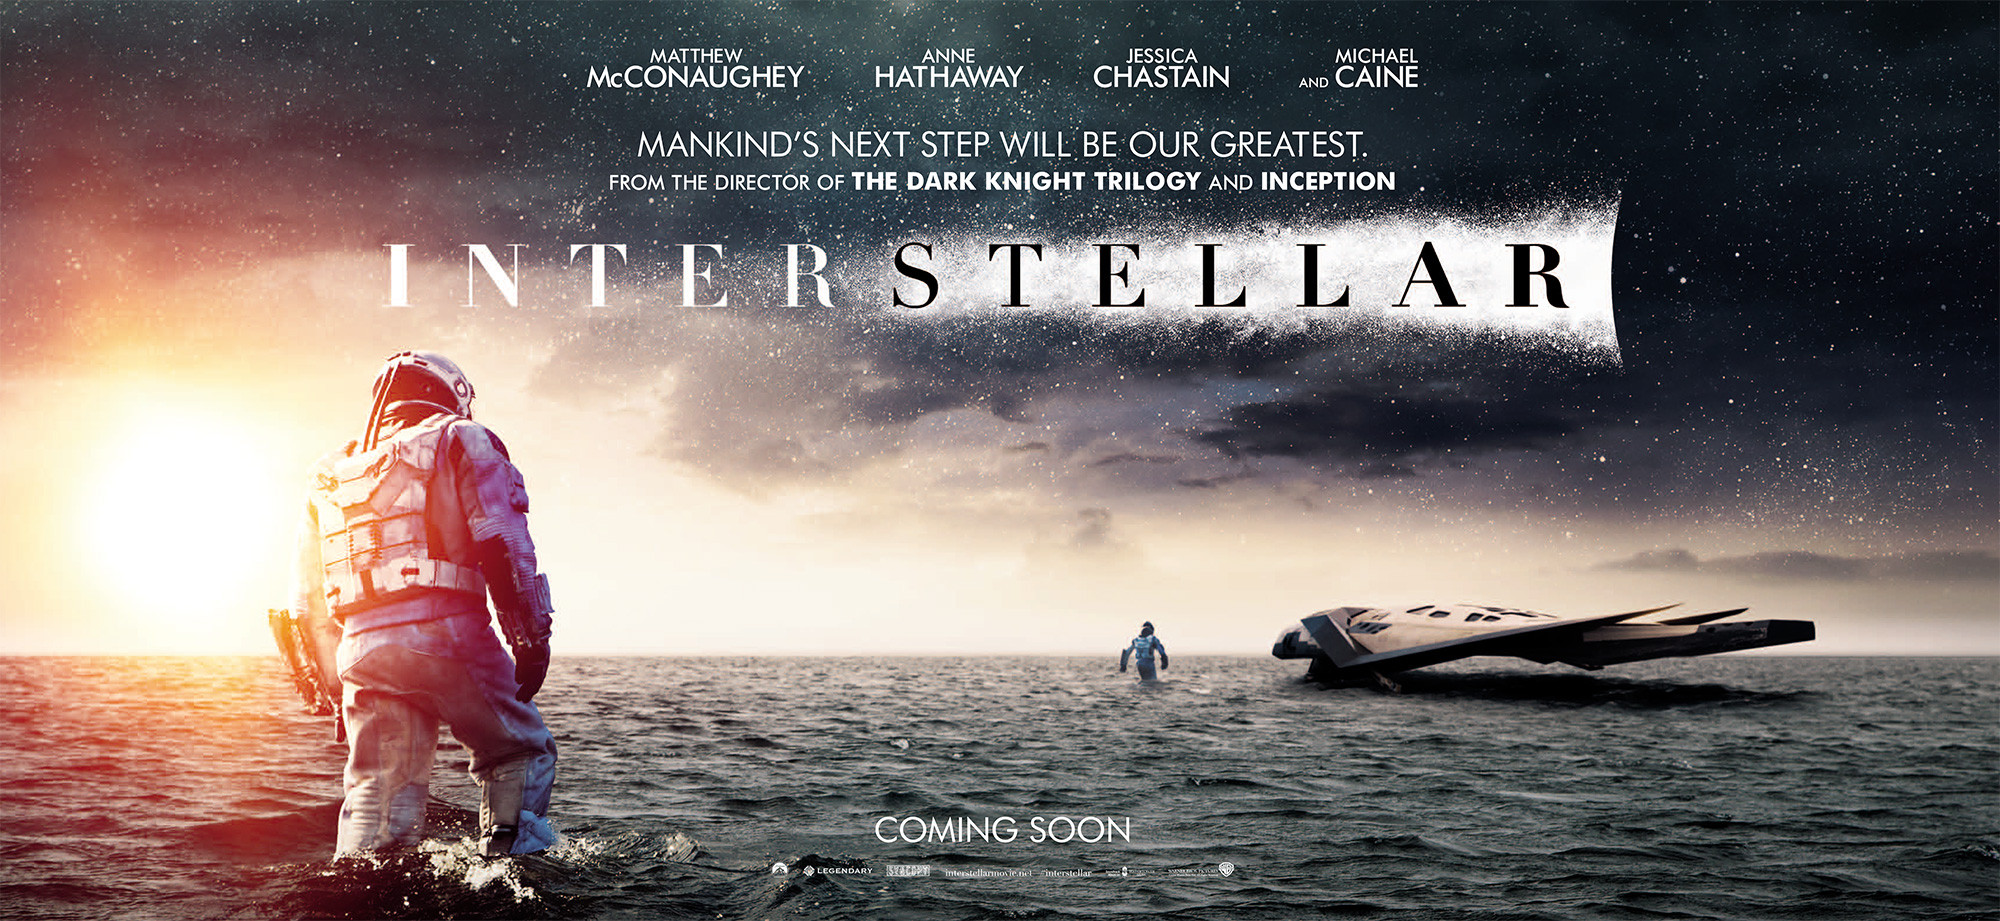 New Interstellar Poster And Trailers Show More Of The Spaceship